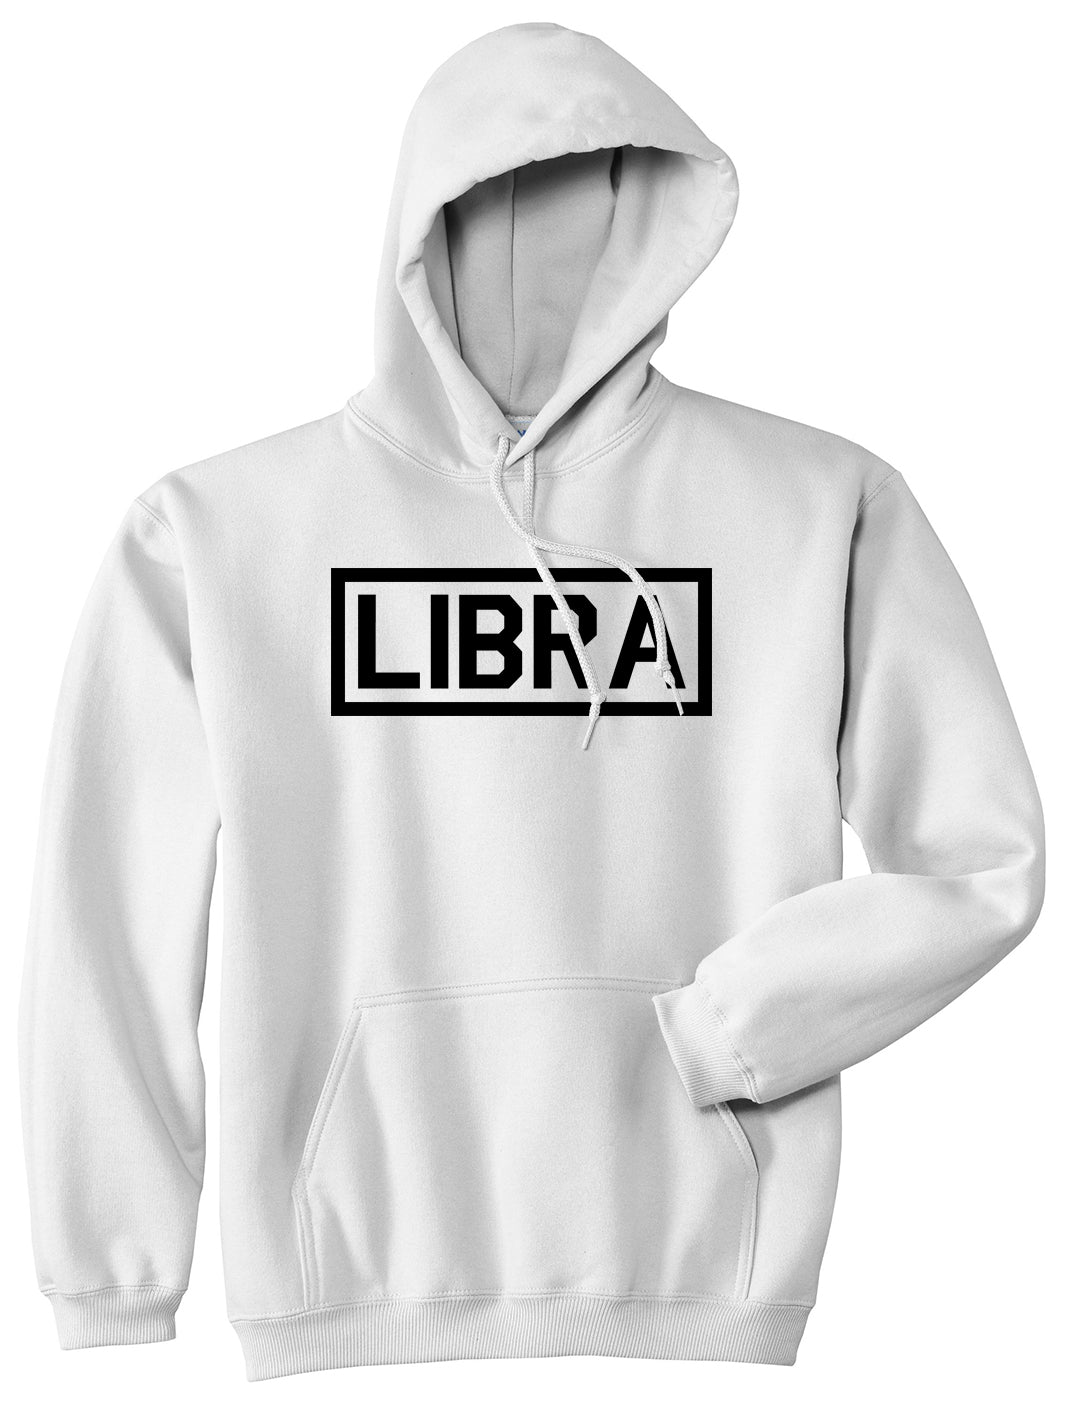 Libra Horoscope Sign Mens White Pullover Hoodie by KINGS OF NY